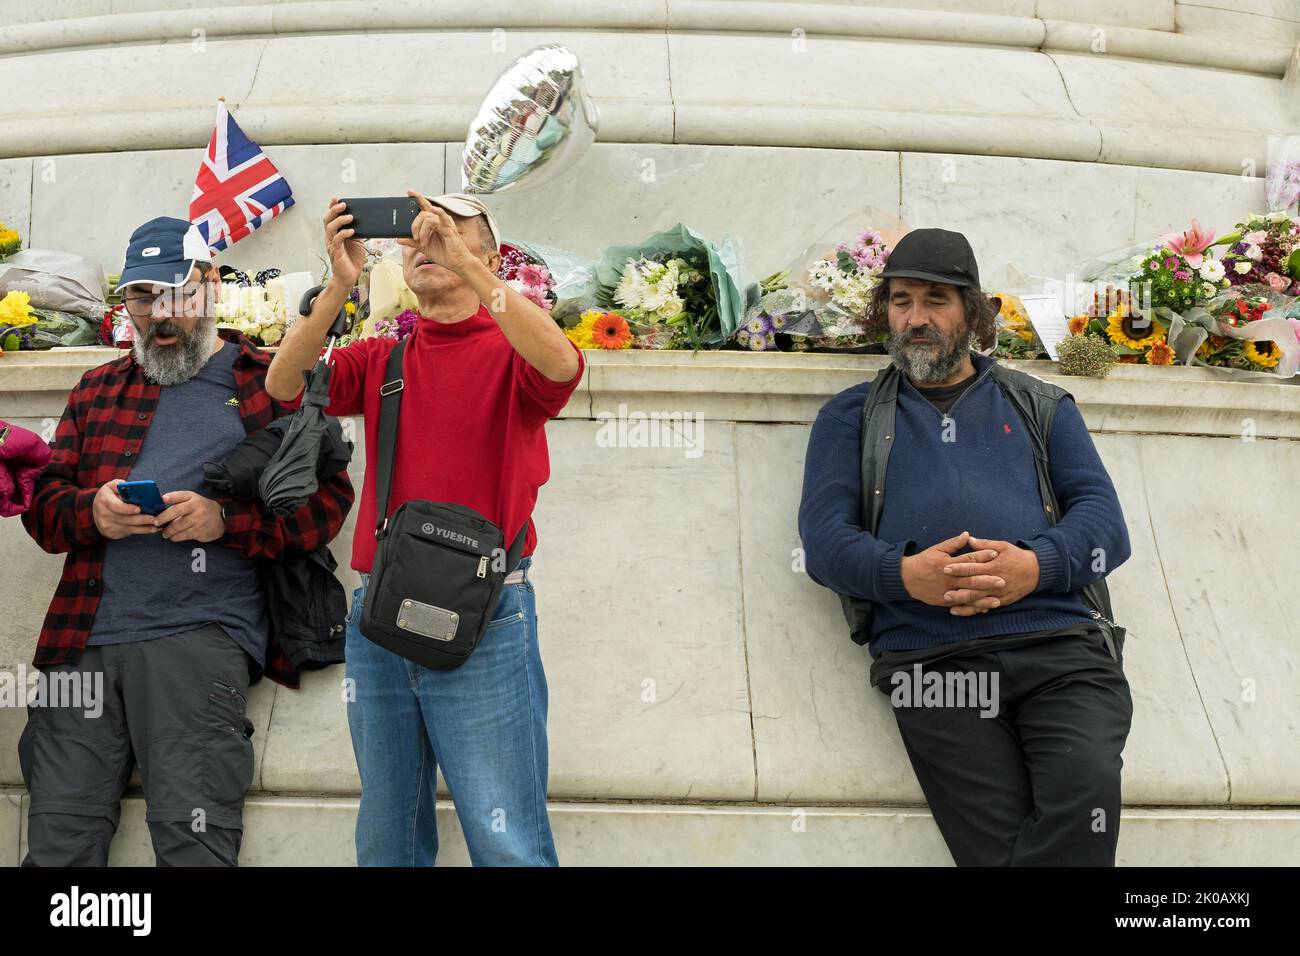 A few tourists outside Buckingham Palace to lay flowers and remember Queen Elizabeth II after her death. London - 9th September 2022 Stock Photo